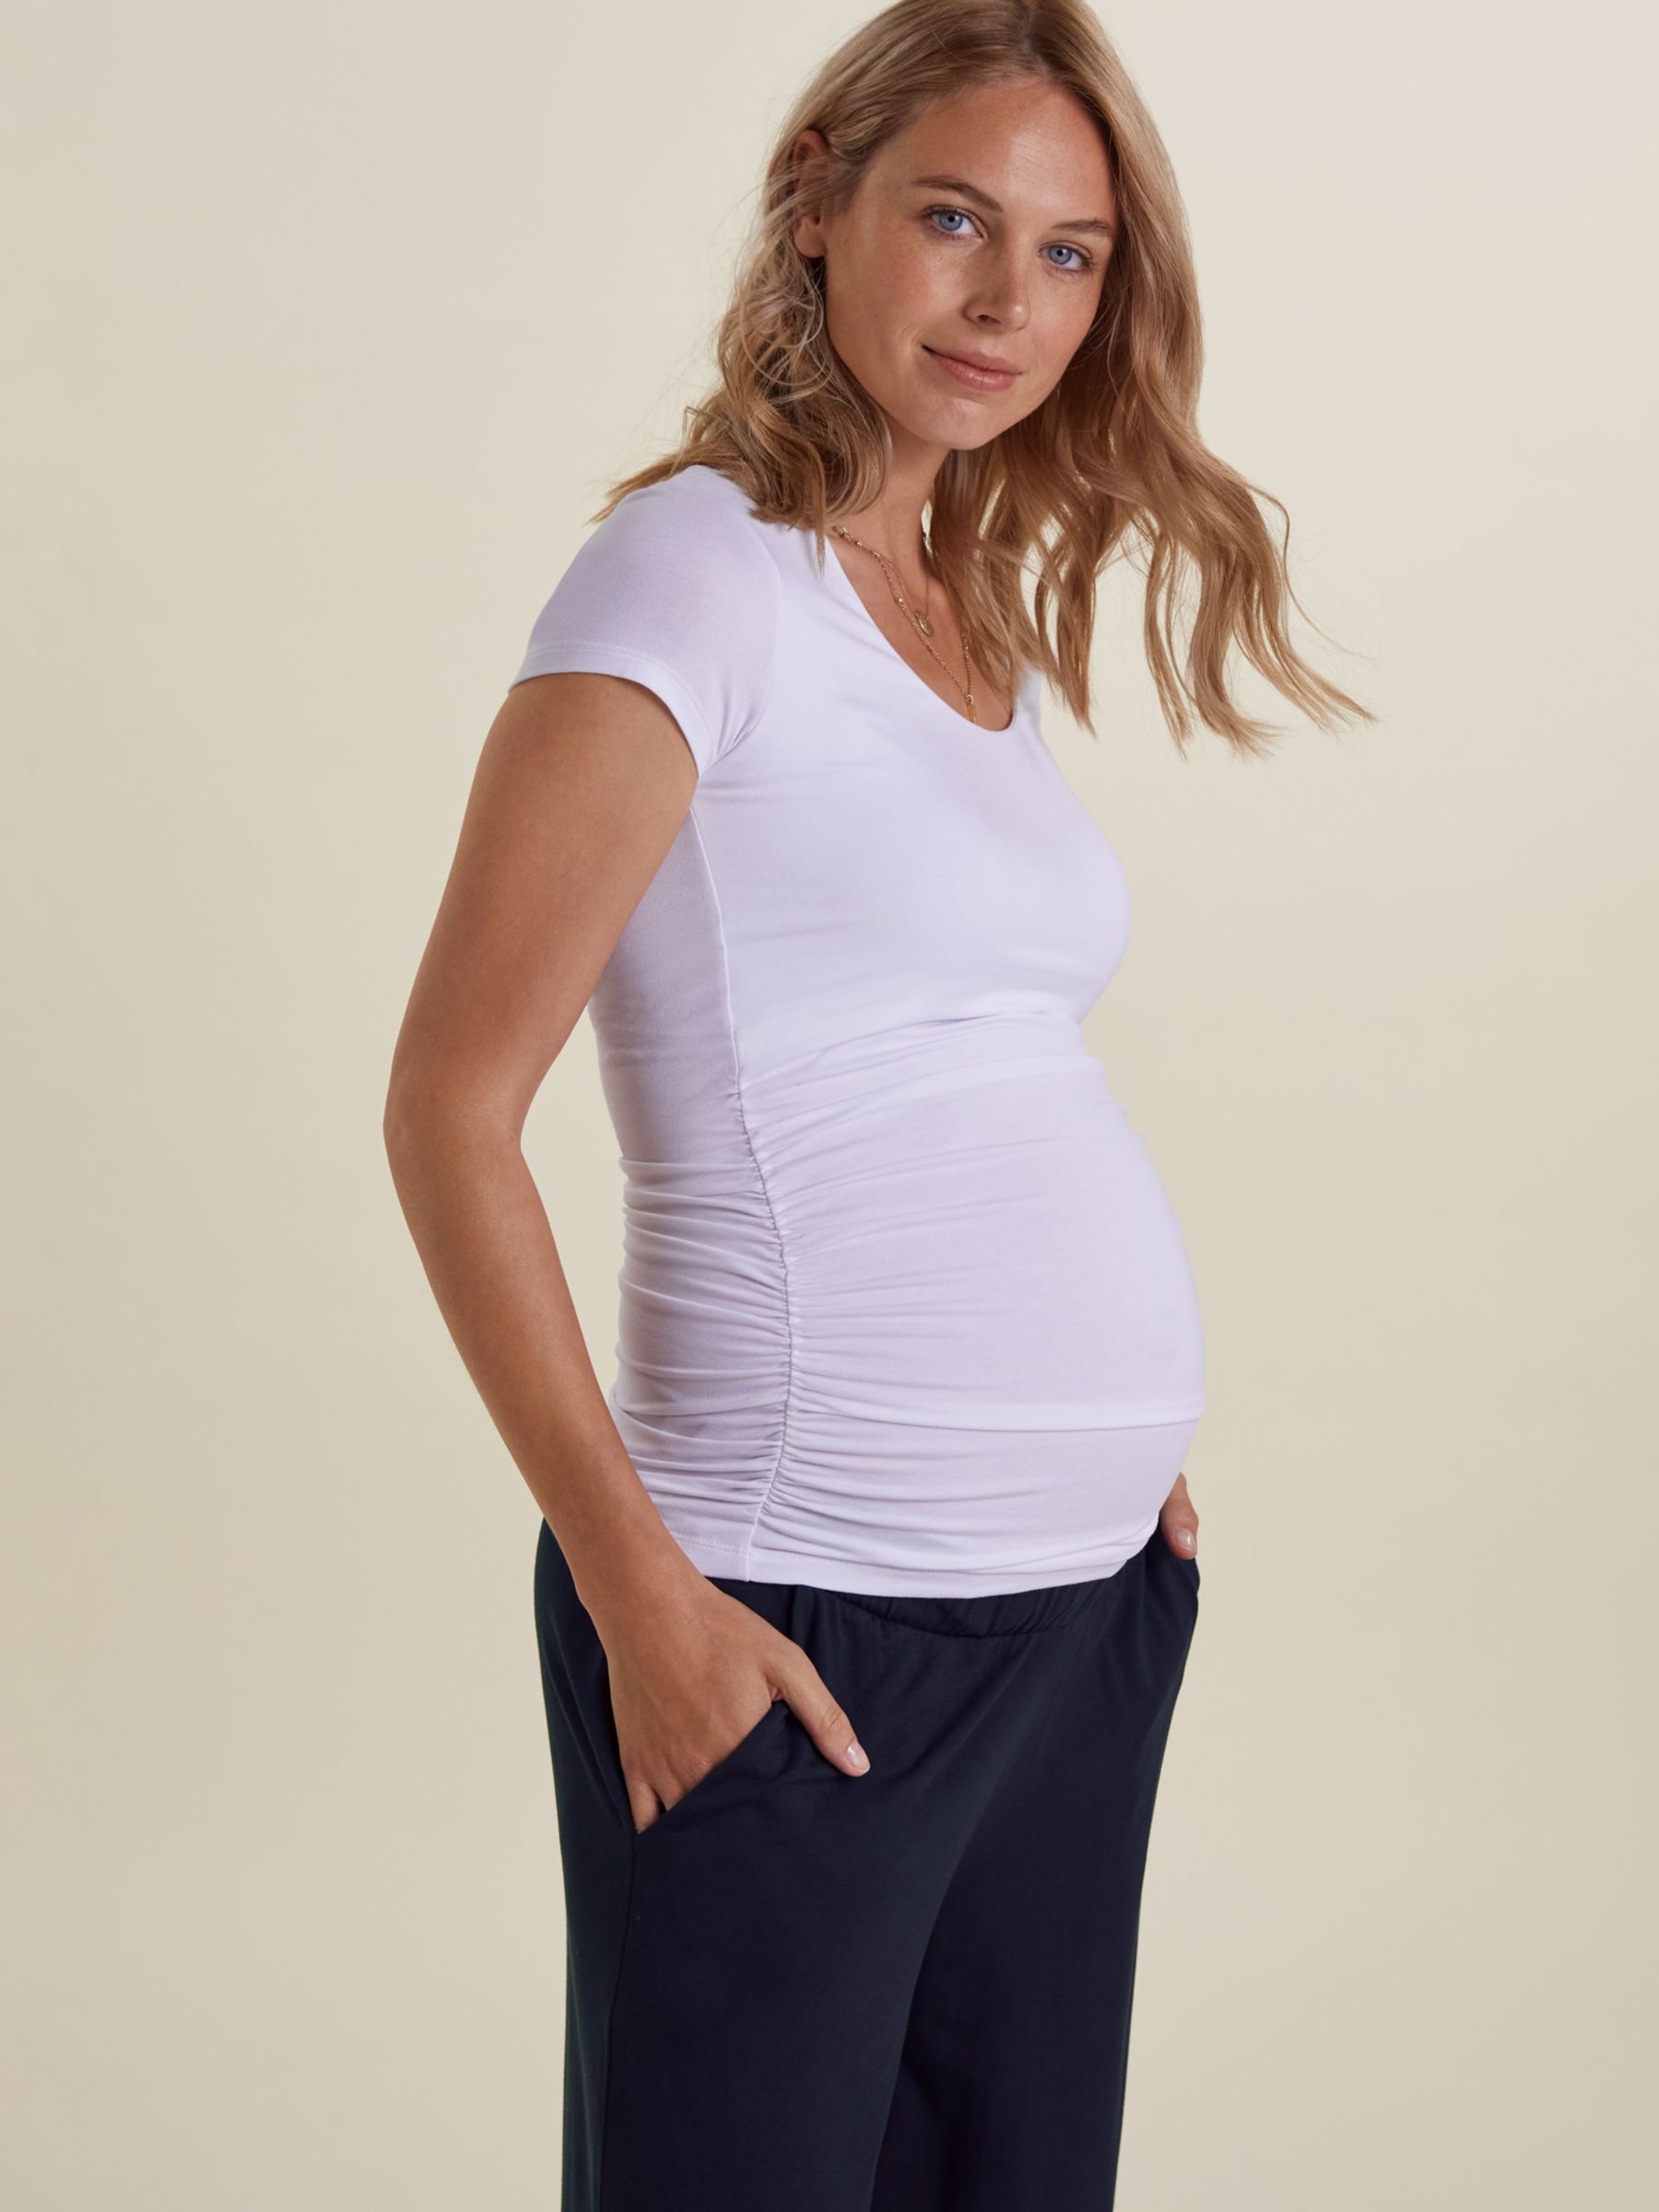 Buy Isabella Oliver The Maternity Top Online at johnlewis.com